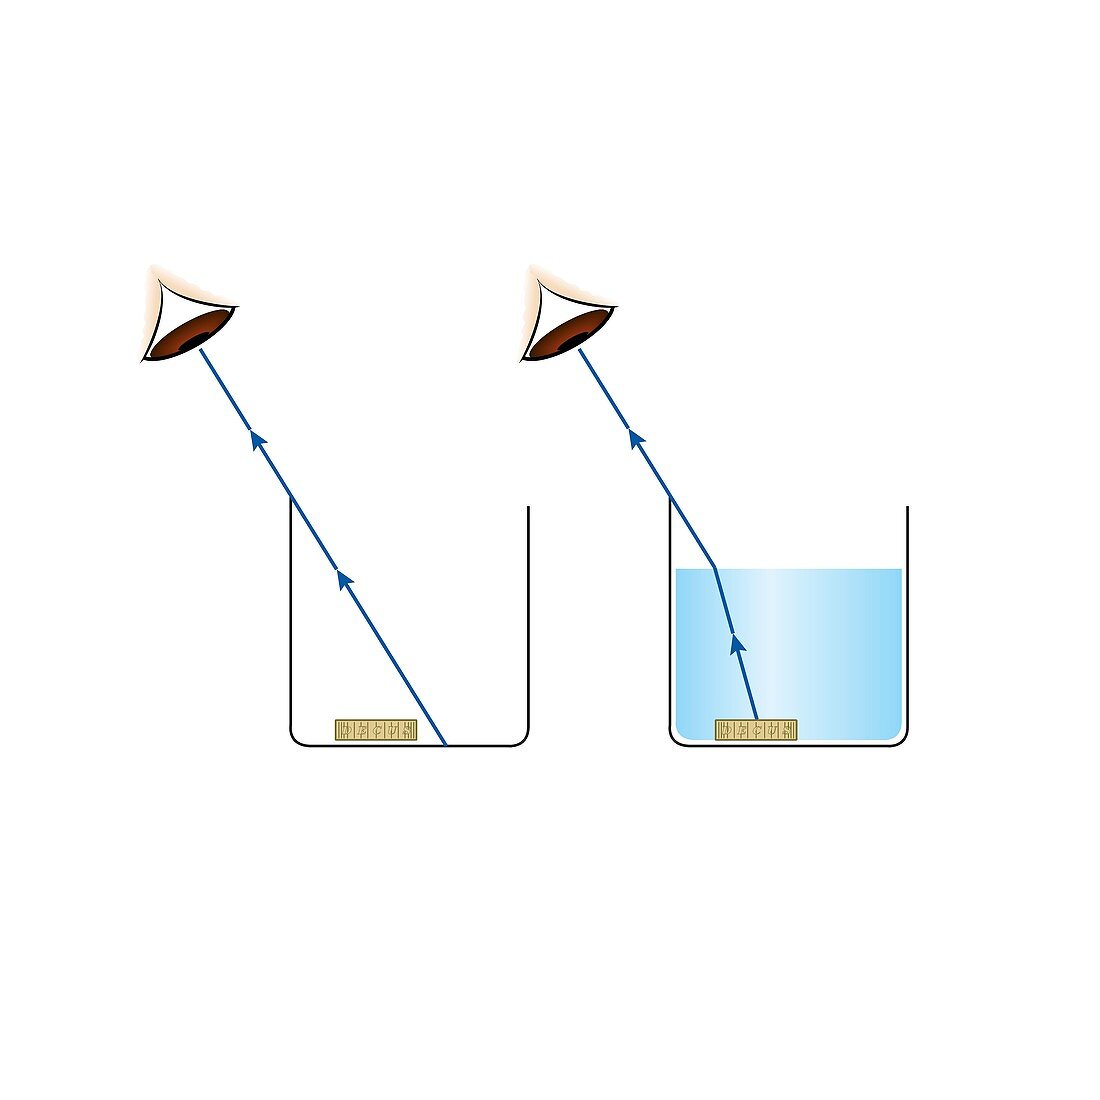 Refraction, real and apparent position, illustration